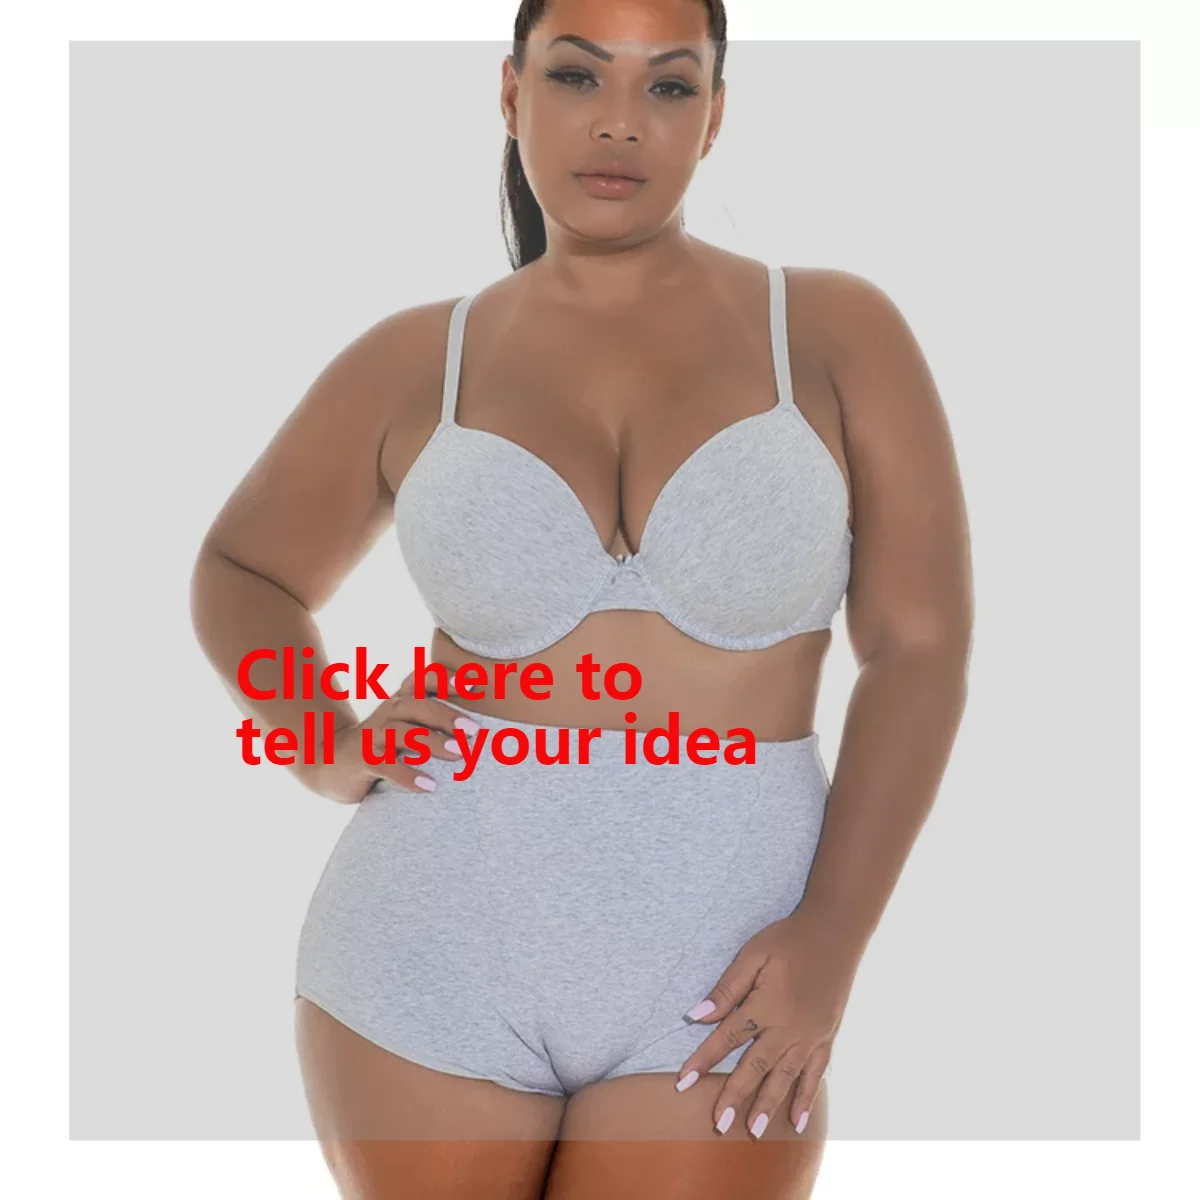 2021 Classic Type Padded Push Up Cotton Plus Size Bra And Panty Set With High Quality - Push Up Bras For Women,Bra & Brief Sets,Bra Underwear Set Product on Alibaba.com